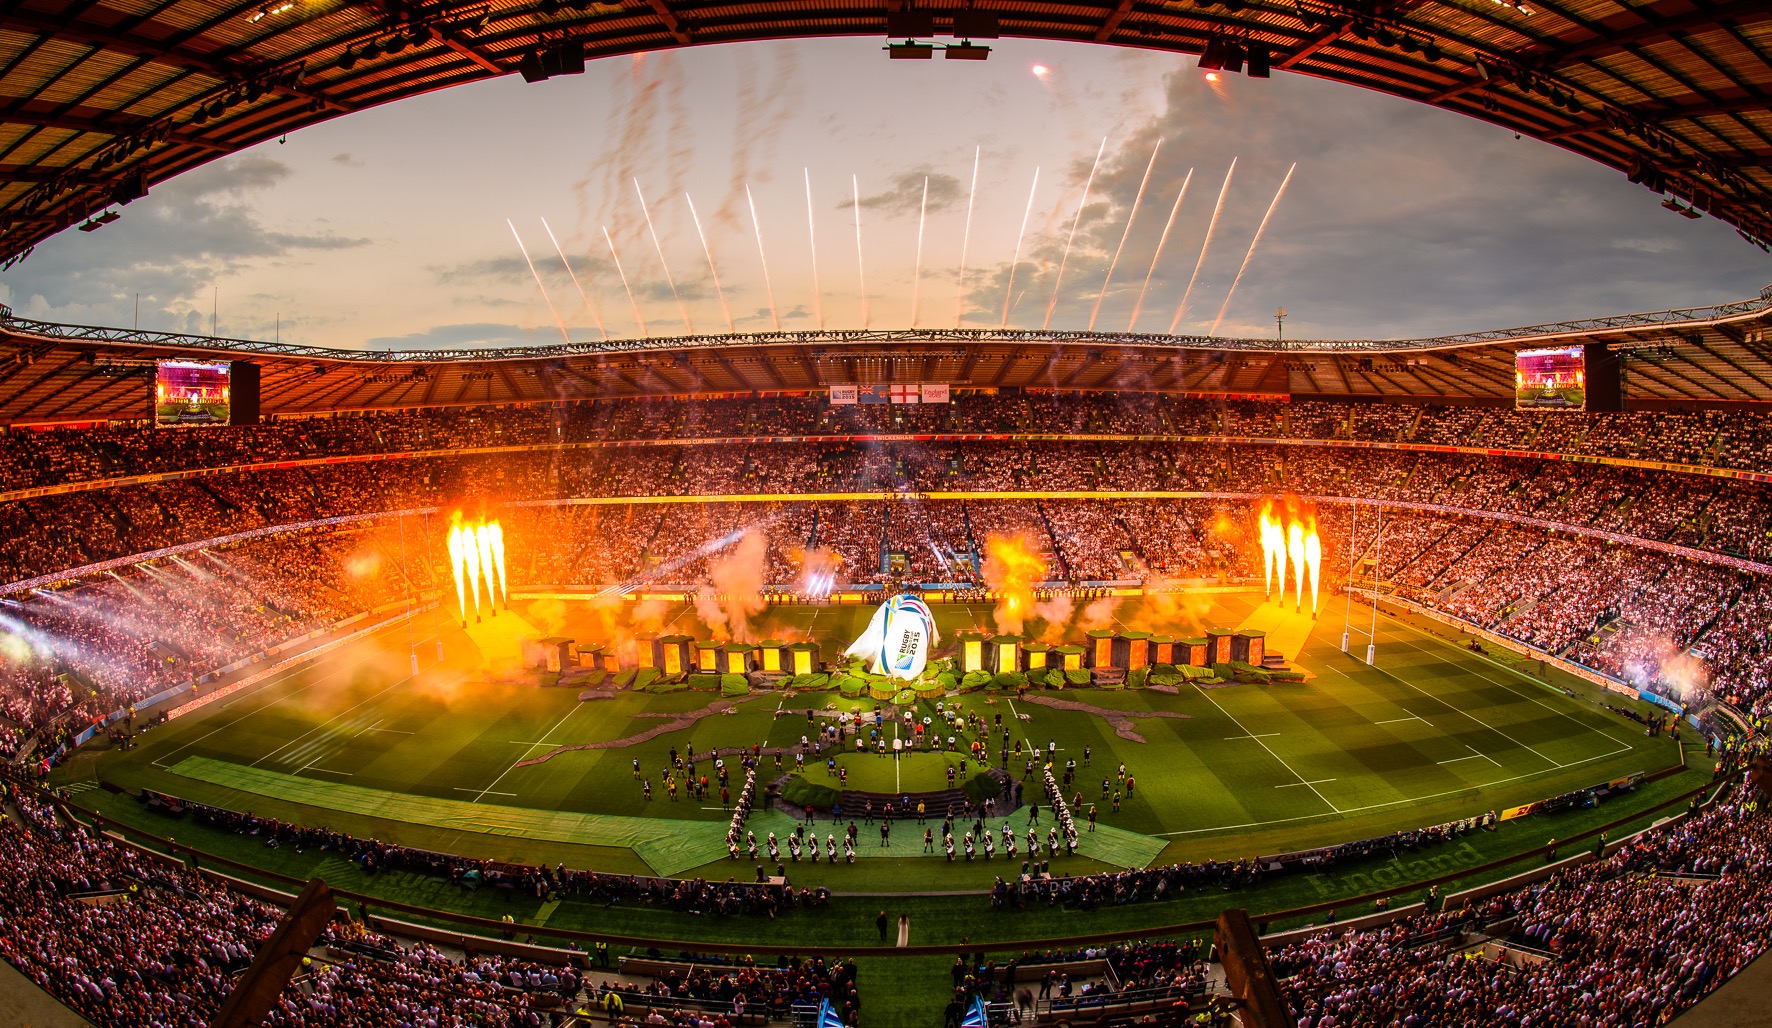 Rugby World Cup Opening Ceremony